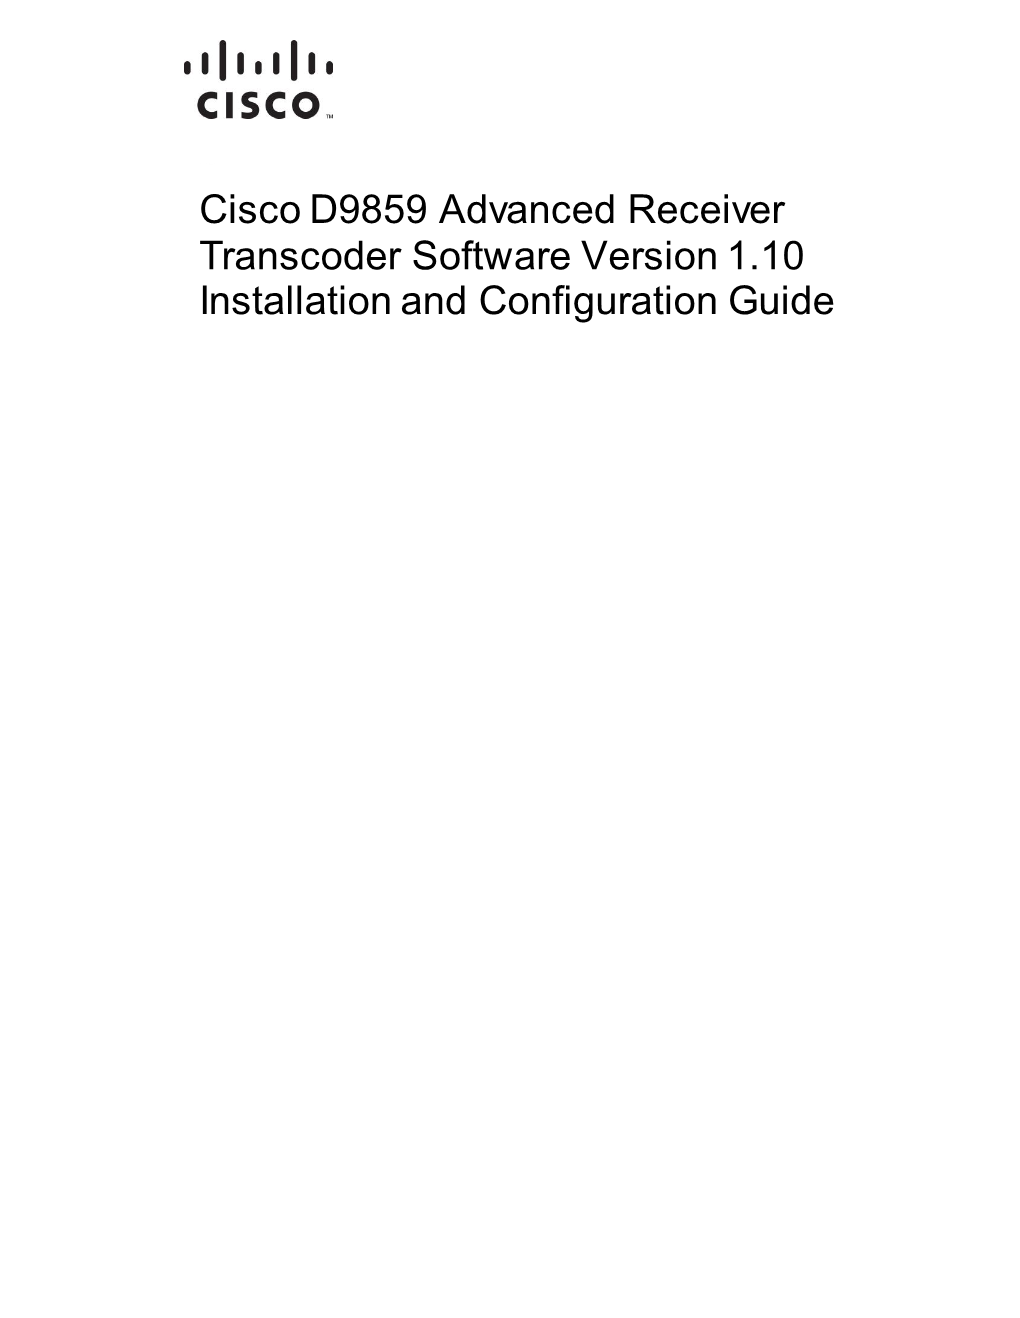 Cisco D9859 Advanced Receiver Transcoder Software Version 1.10 Installation and Configuration Guide